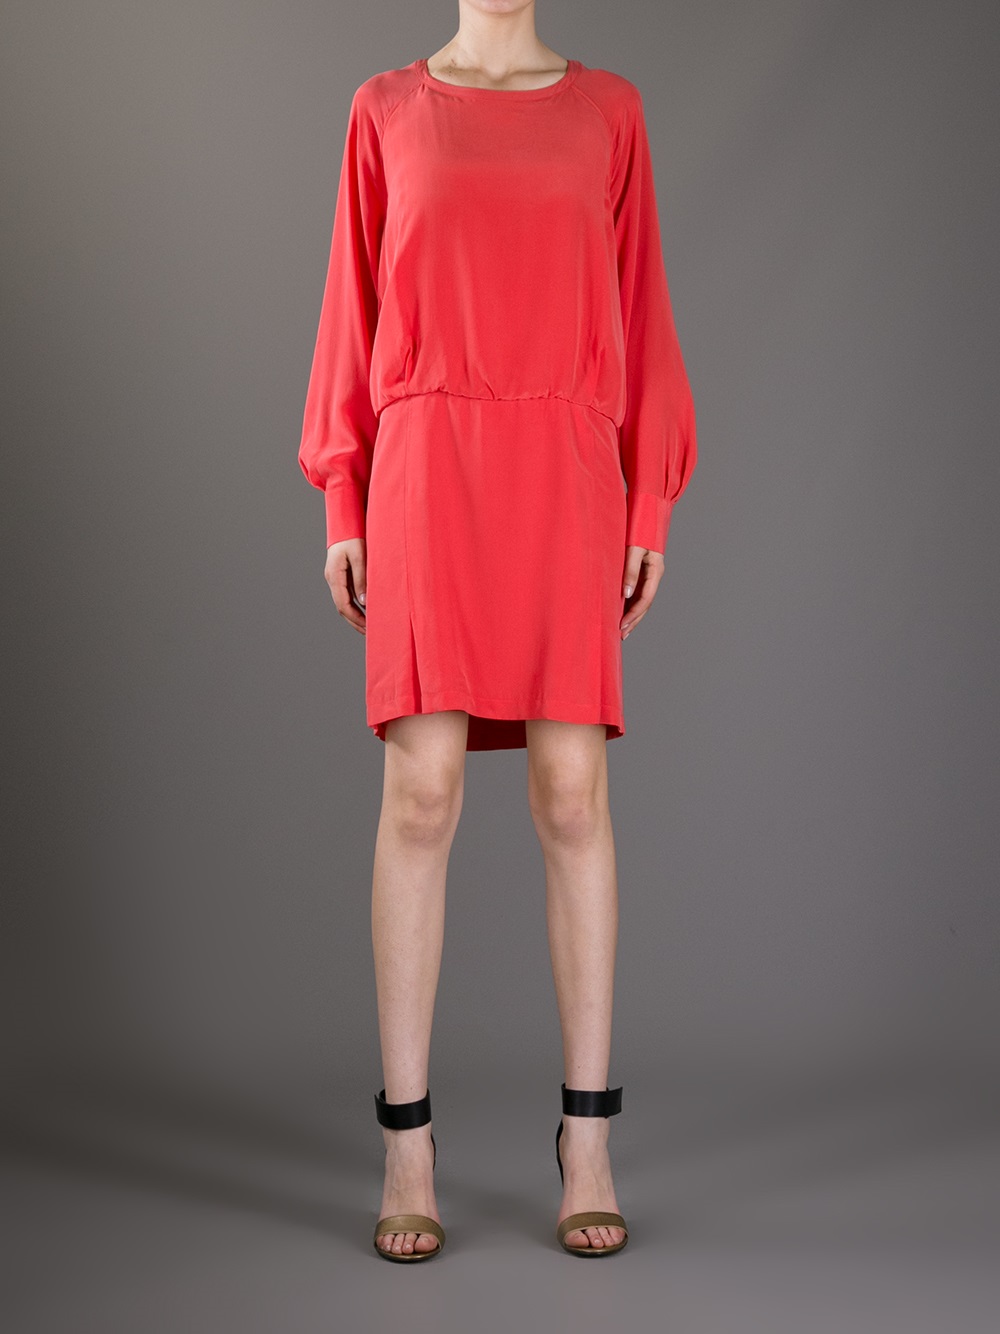 See By Chloé Silk Dress in Yellow & Orange (Red) - Lyst